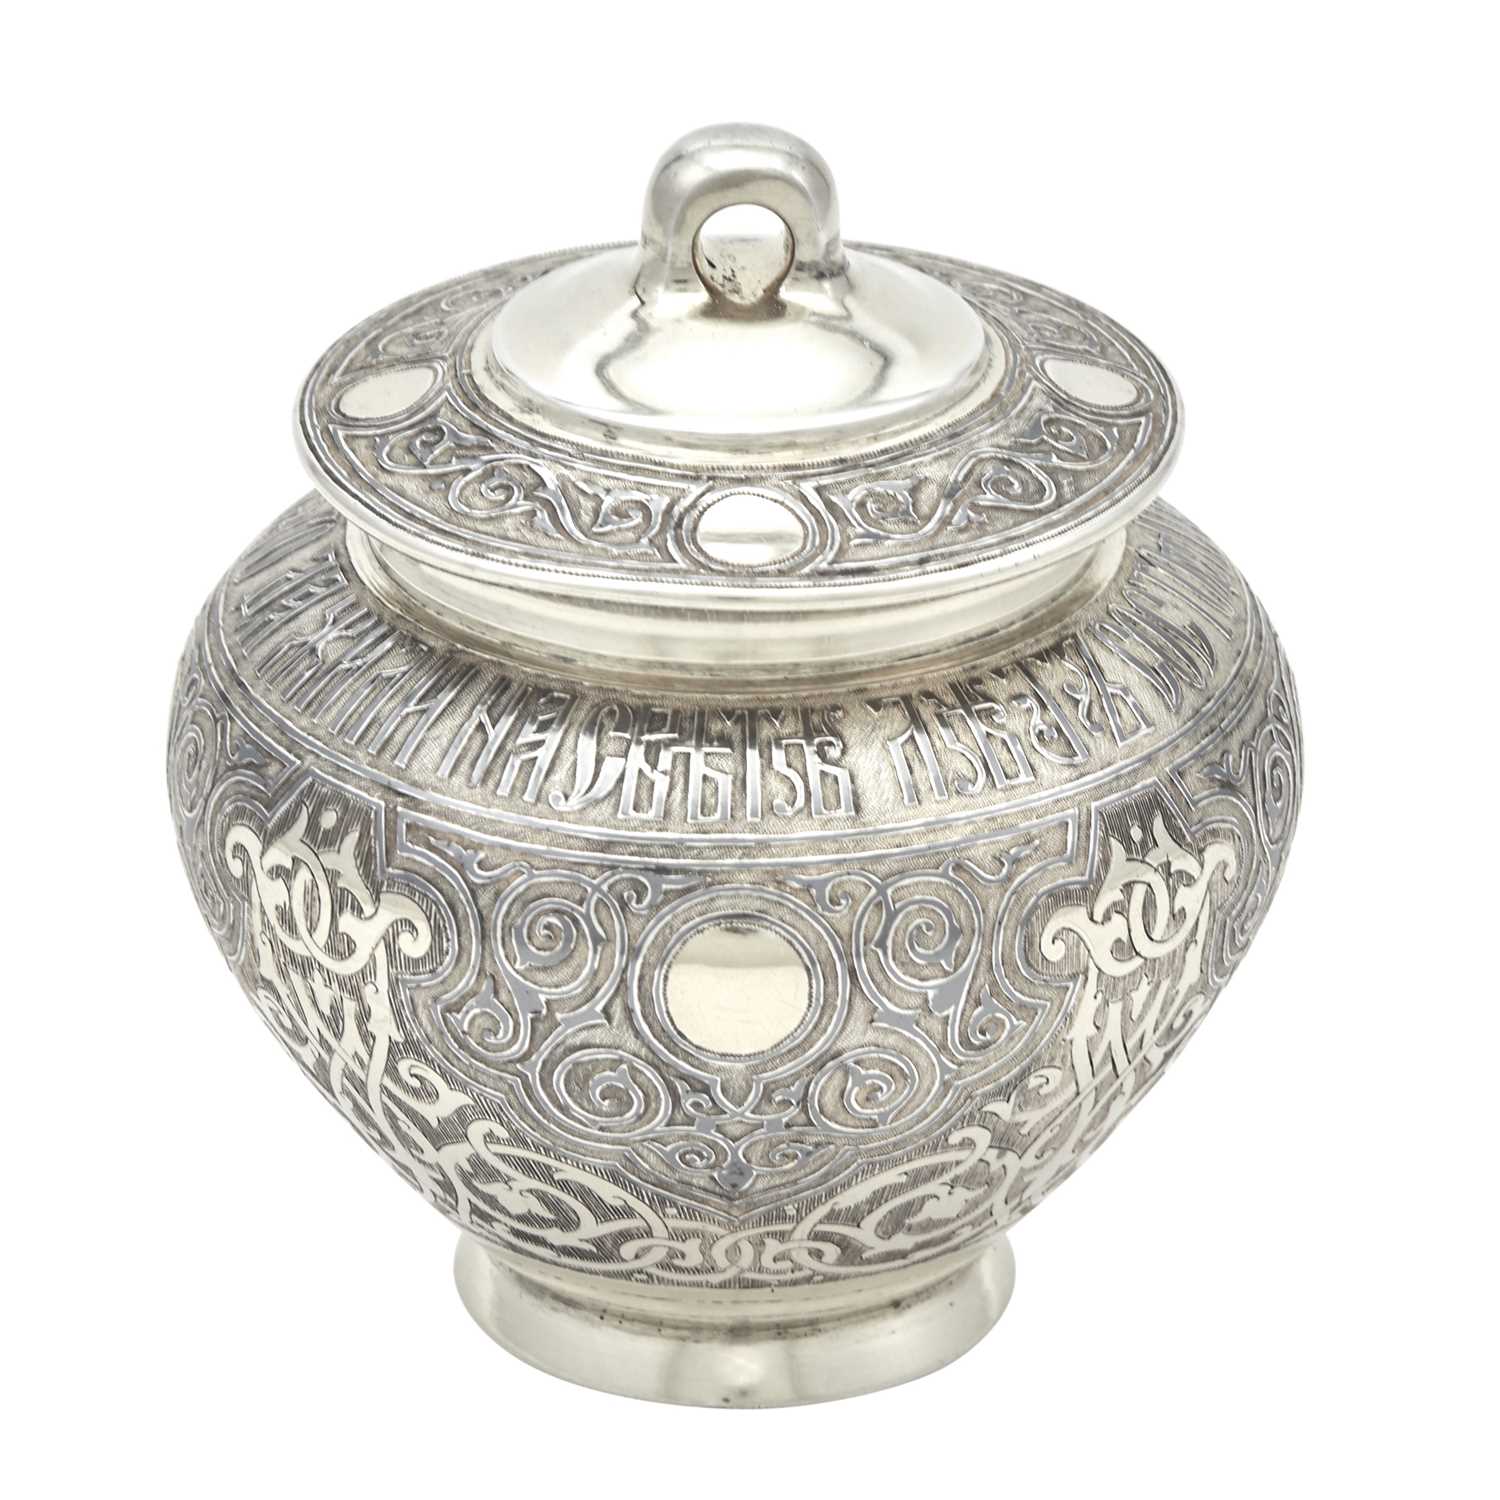 Lot 15 - Russian Silver-Gilt and Niello Bratina and Cover